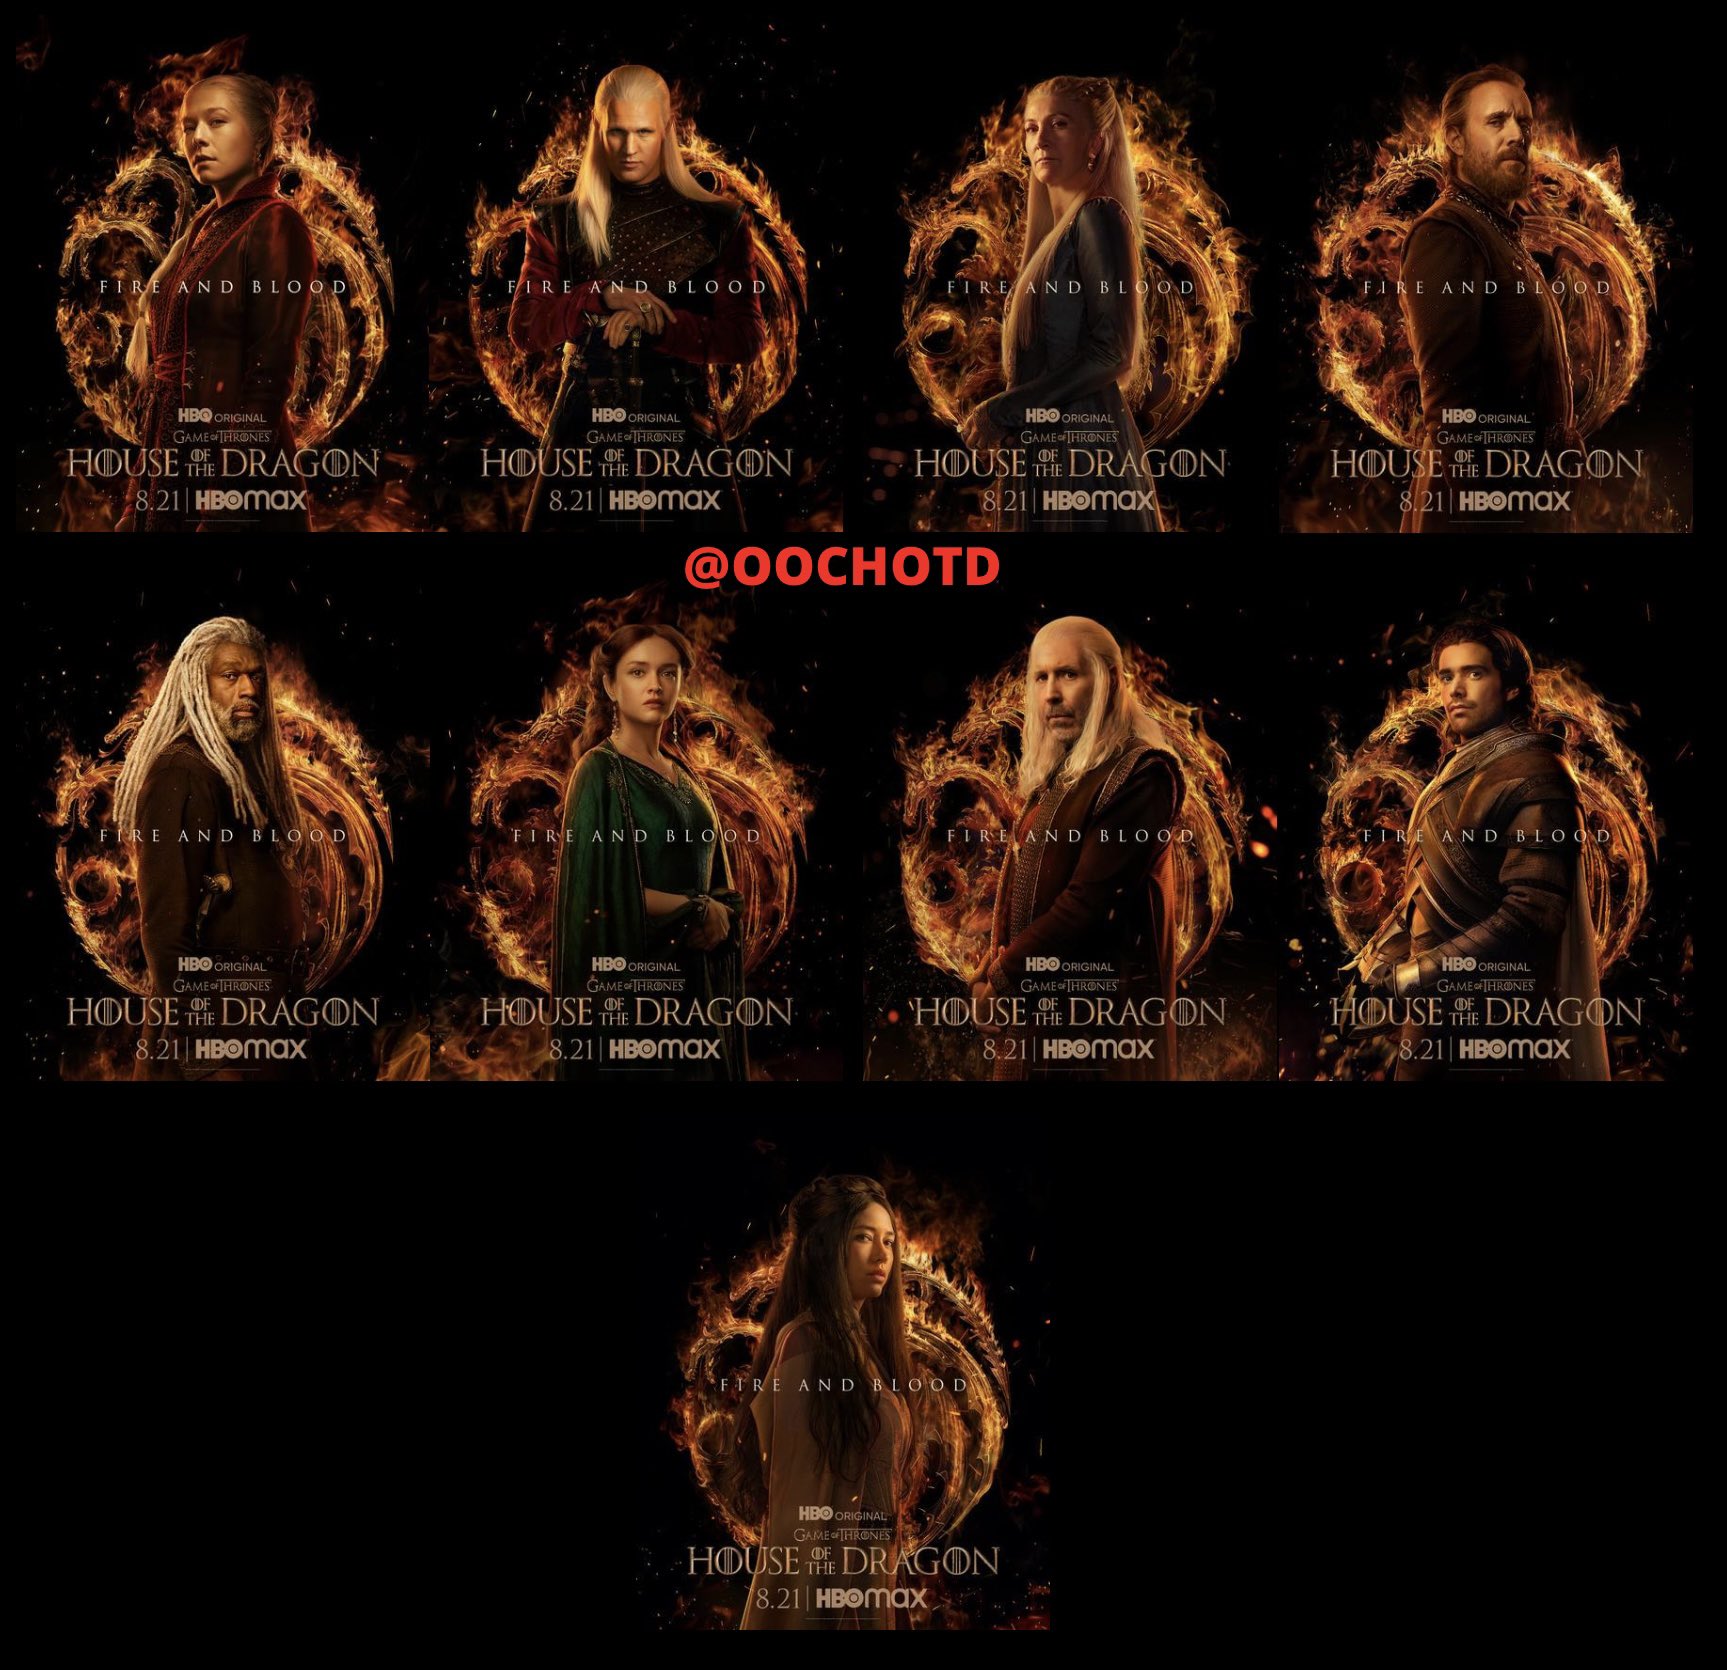 What are the dragons' names in Game of Thrones?